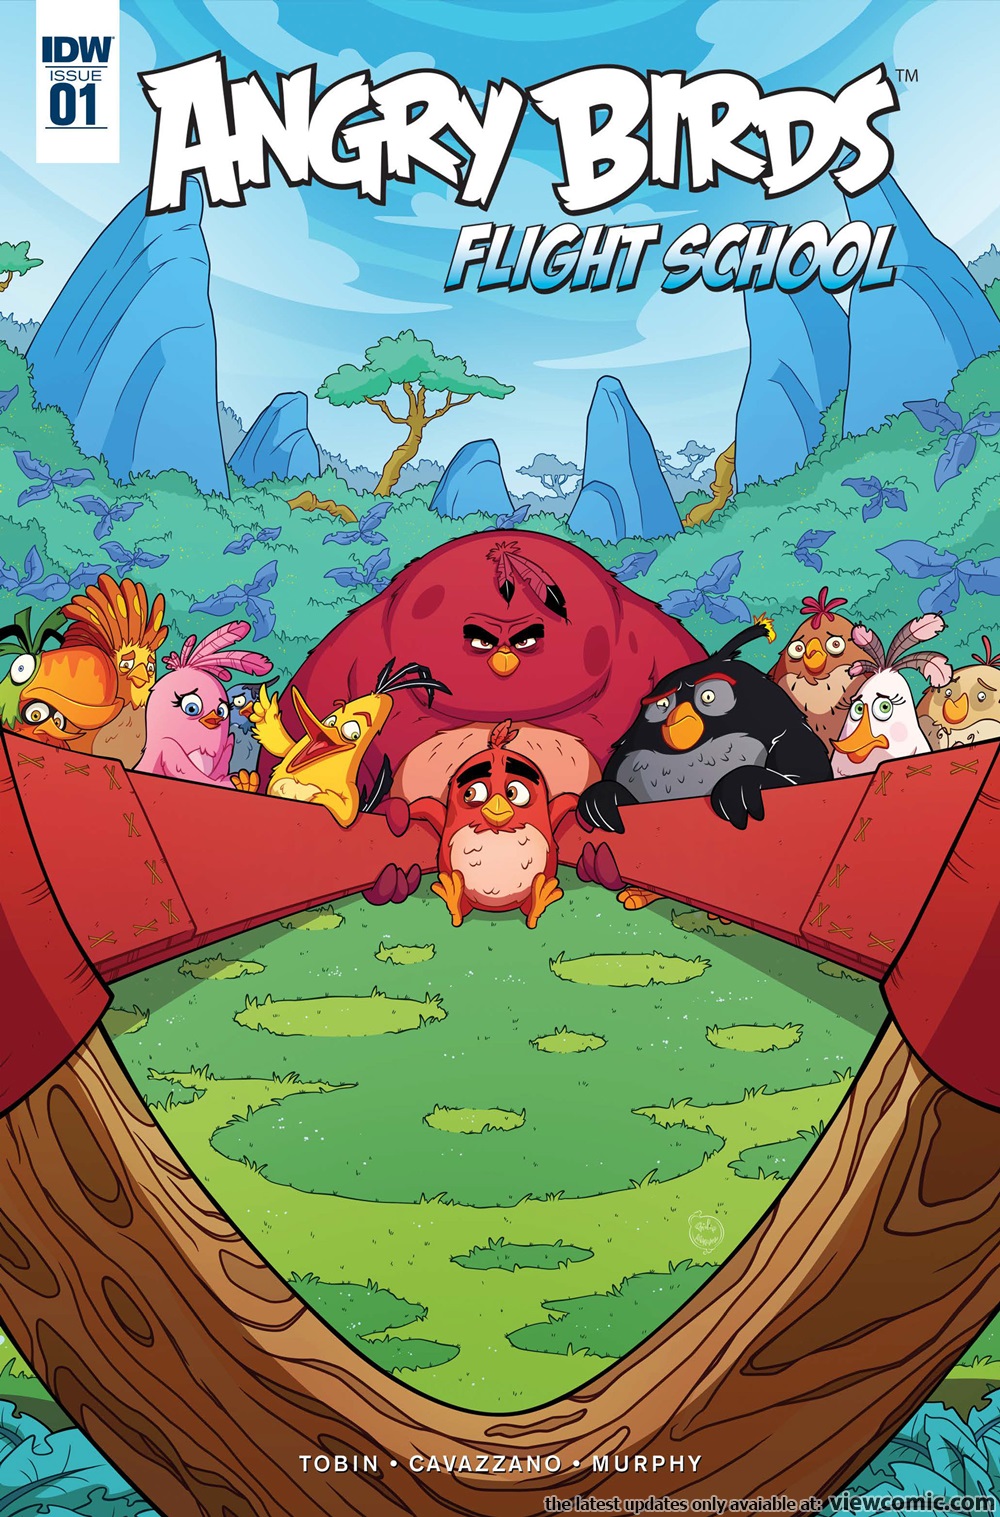 Angry Birds Gay Sex Porn - Angry Birds Flight School 001 2017 | Read Angry Birds Flight School 001  2017 comic online in high quality. Read Full Comic online for free - Read  comics online in high quality .